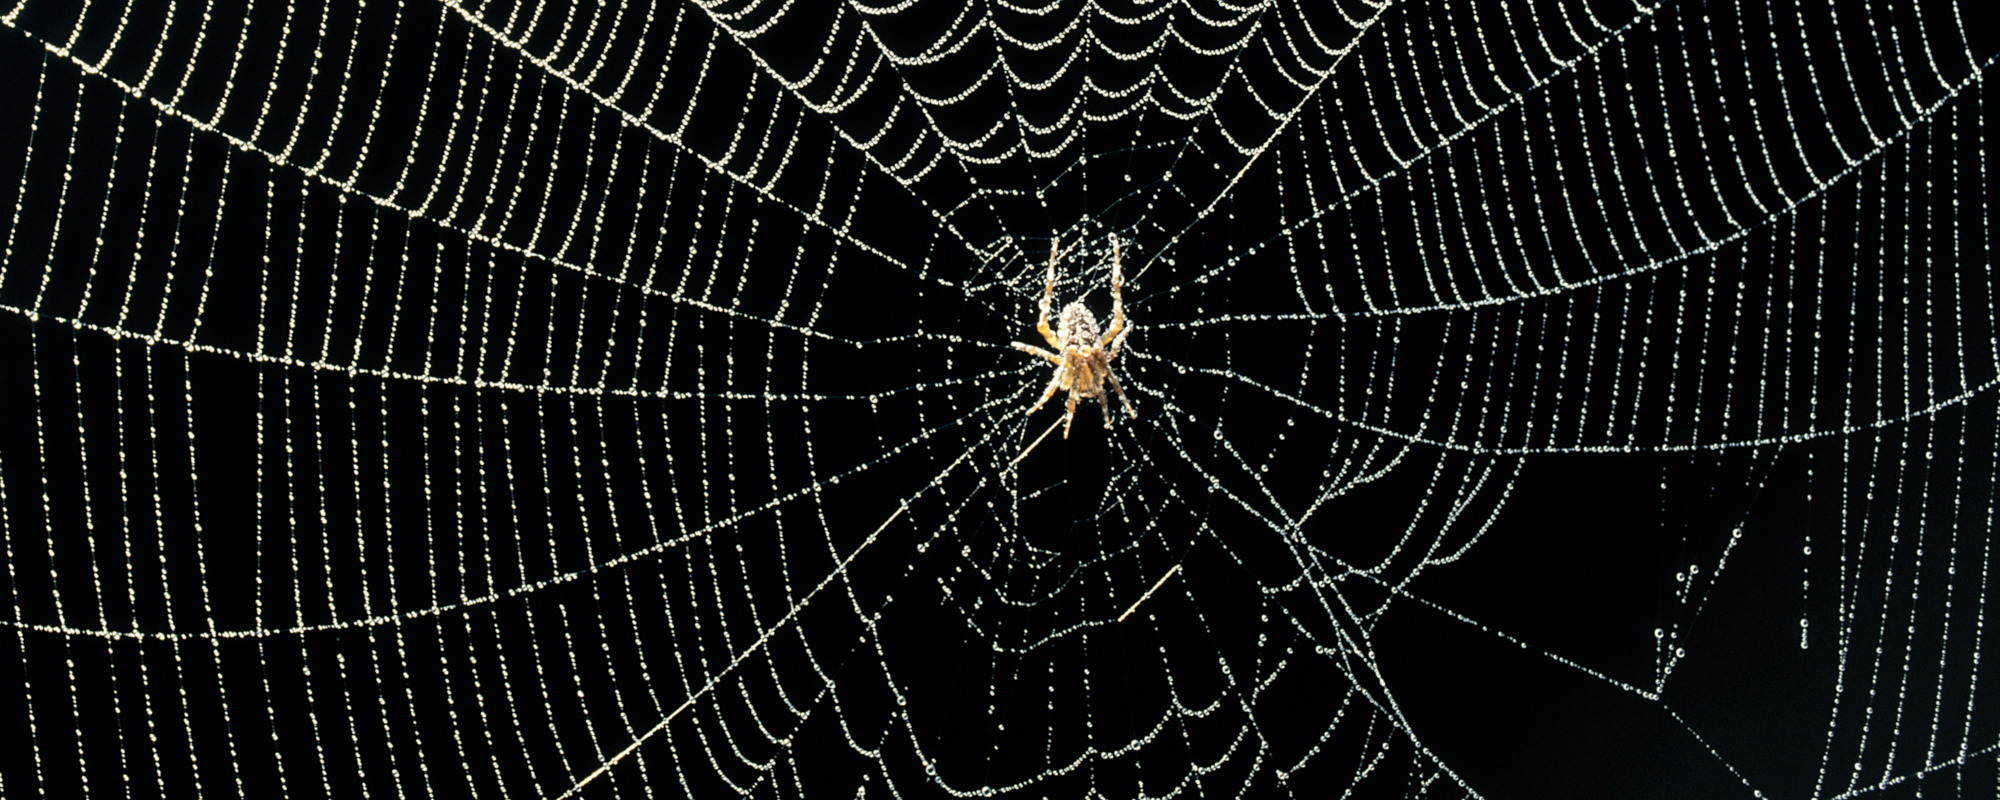 Behind the Meaning of the Classic Nursery Rhyme “Itsy Bitsy Spider” -  American Songwriter